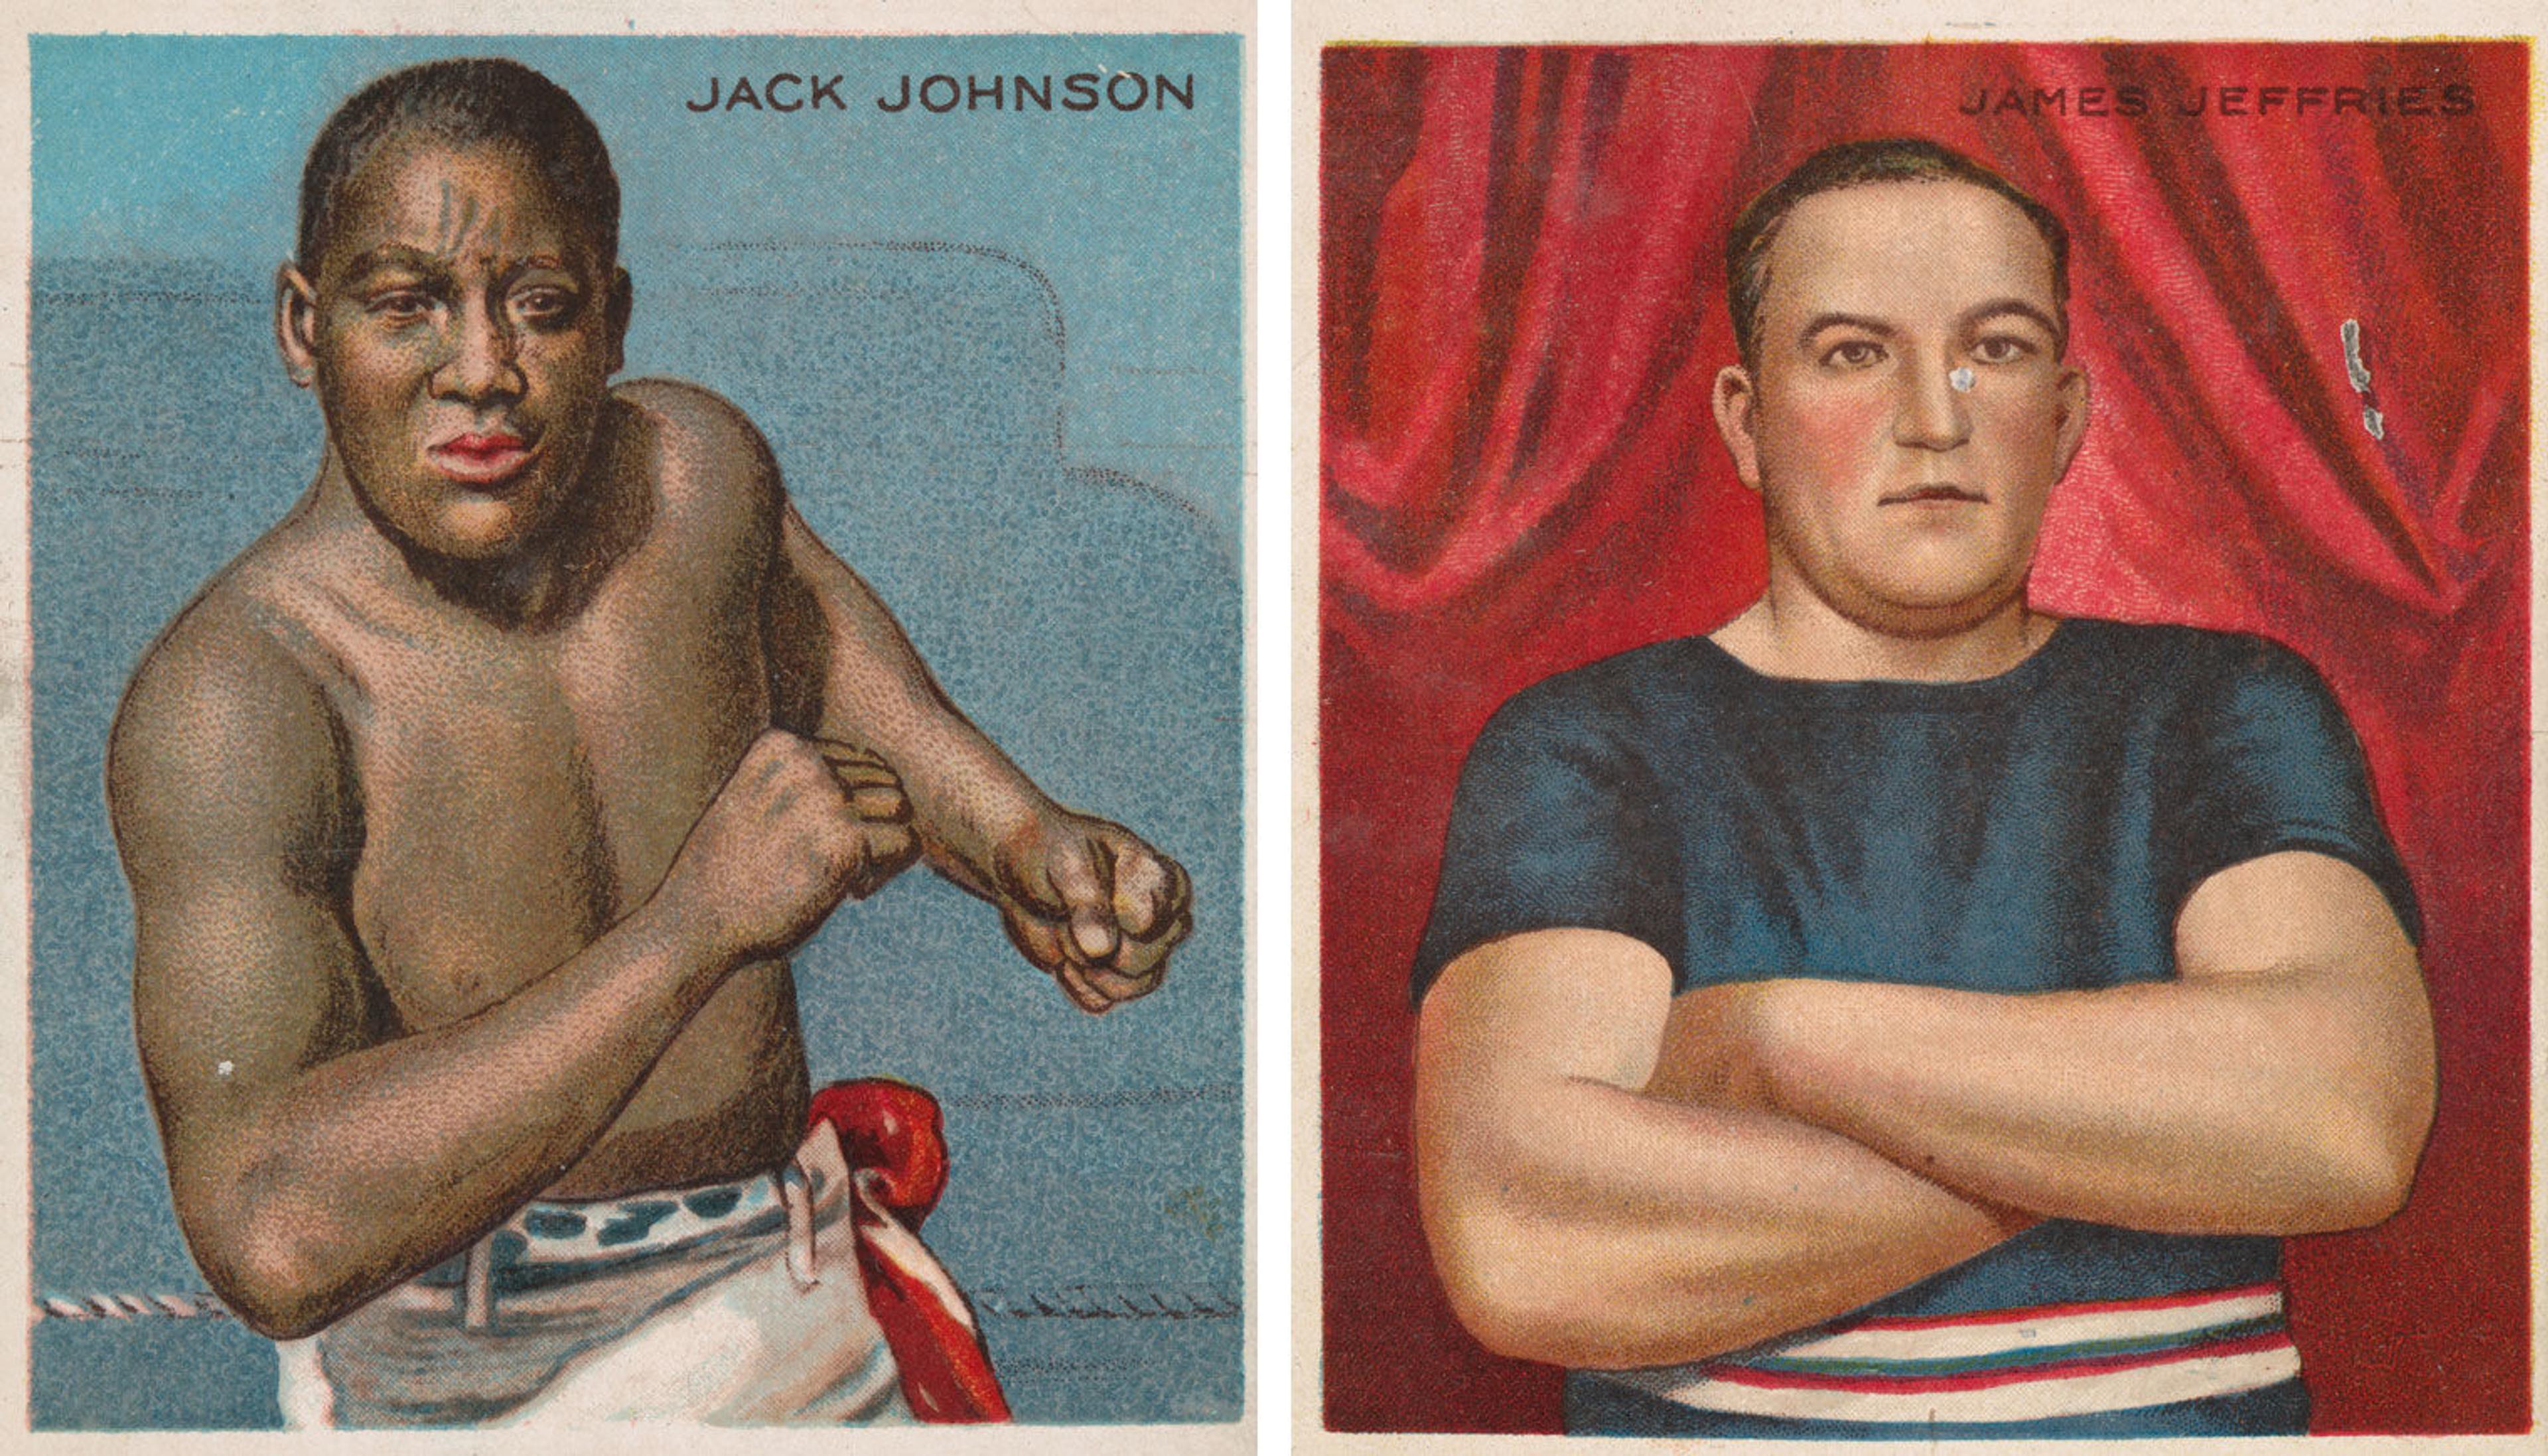 Vintage boxing cards from the early 20th century depicting Jack Johnson (left) and James Jeffries (right)